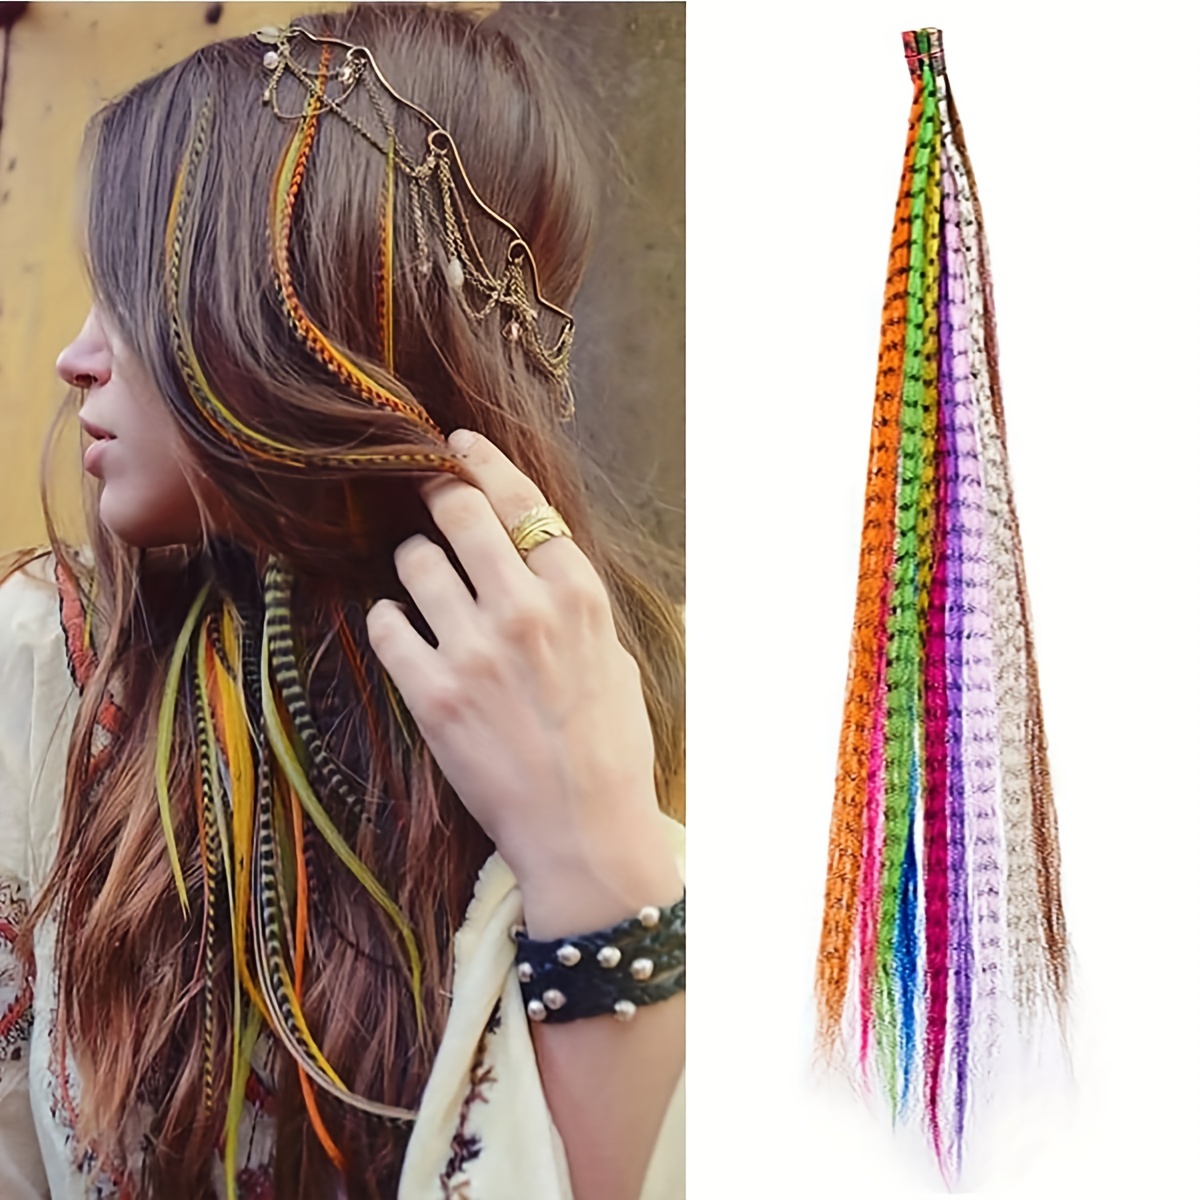 Feather Hair Extensions: They're Not Just Trendy, They're So